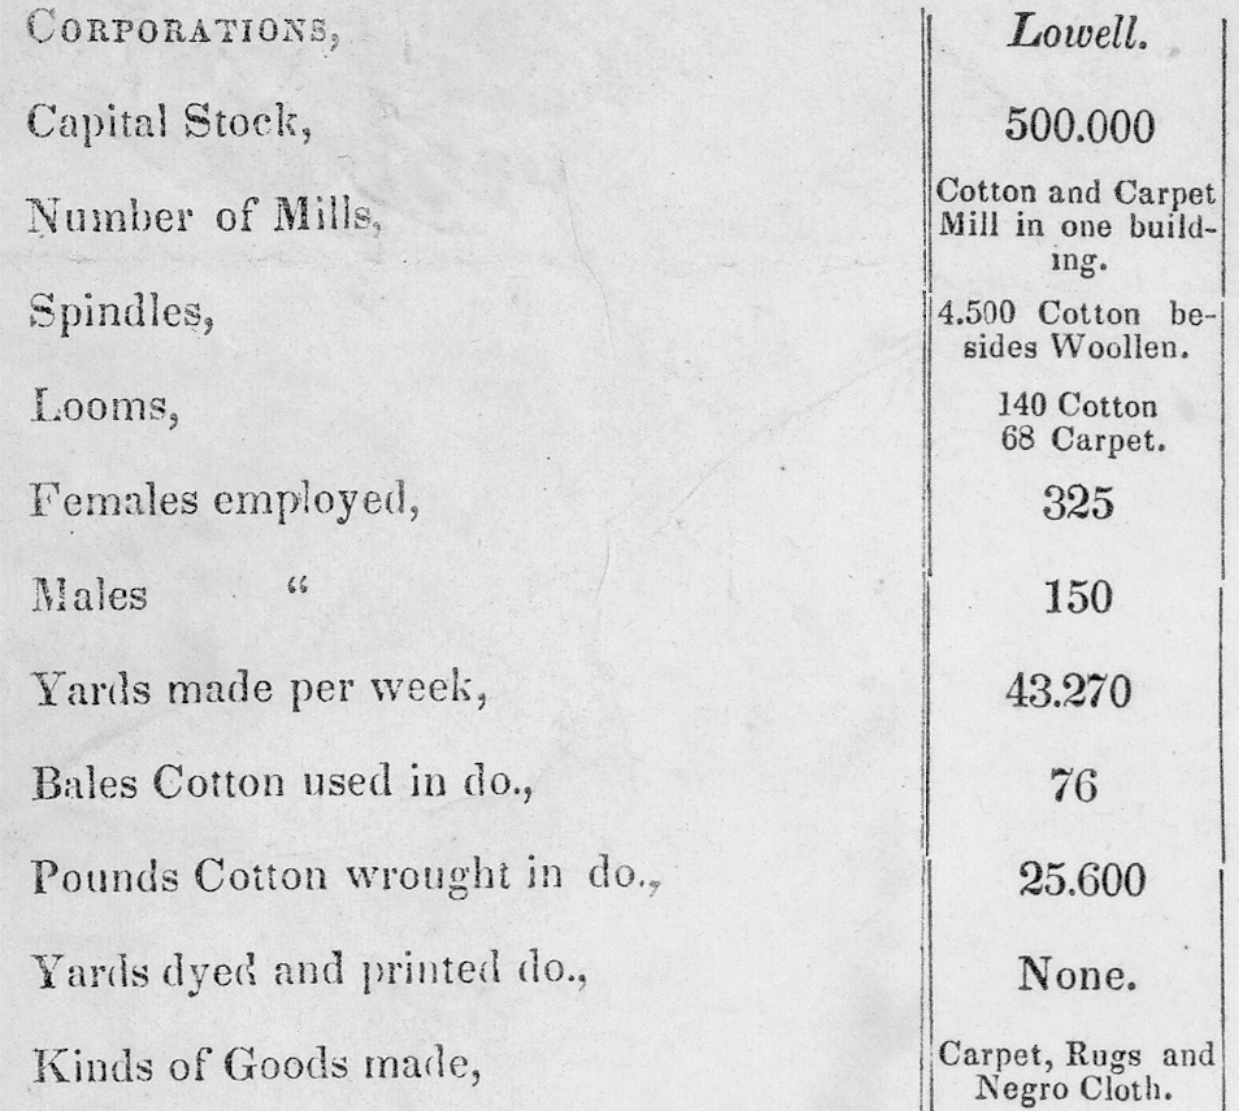 In this compilation of statistics from mill companies across Lowell, it is explicitly mentioned that the Lowell Corporation made “carpets, rugs and negro cloth” as their goods.